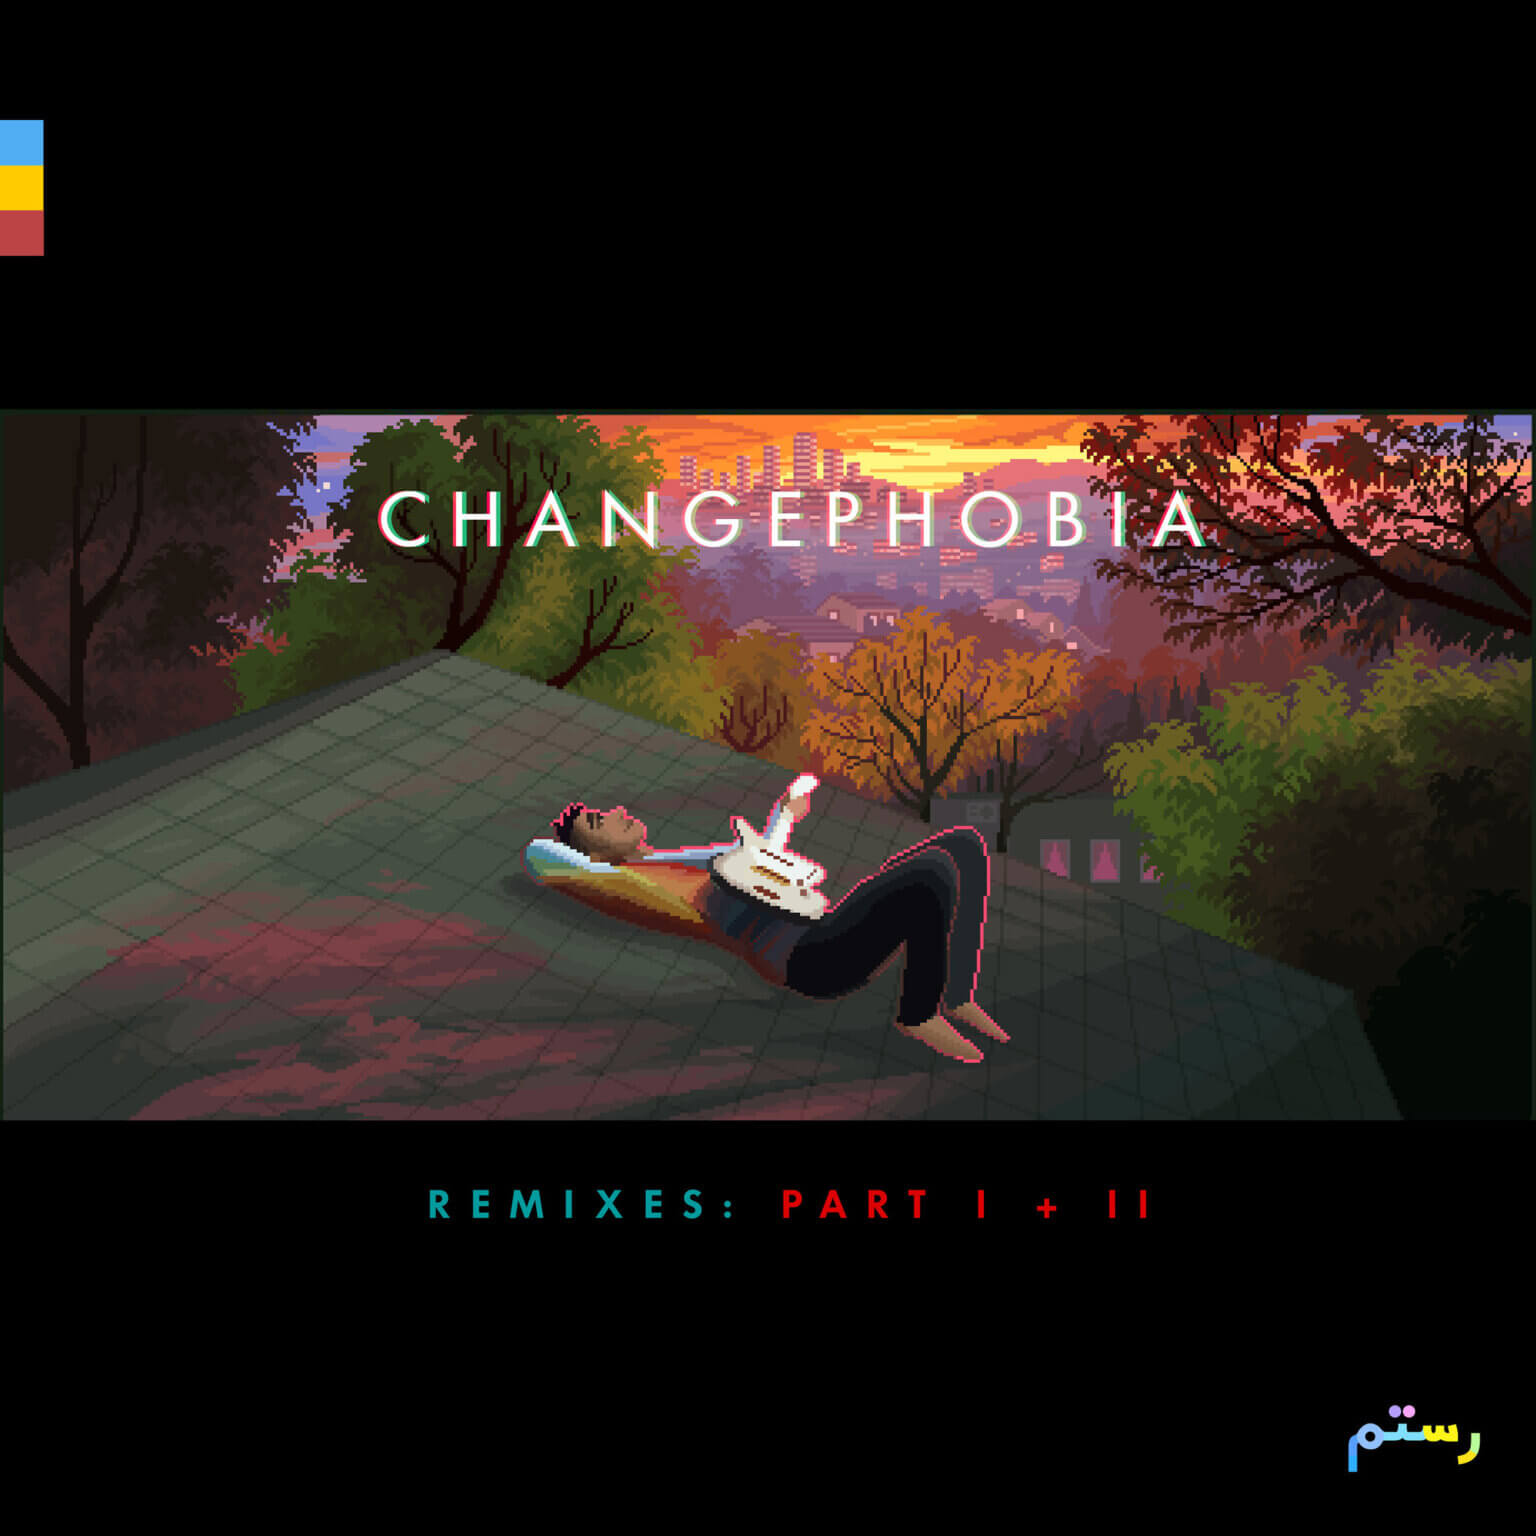 Rostam Releases Complete Remix Project, 'Changephobia' Remixes